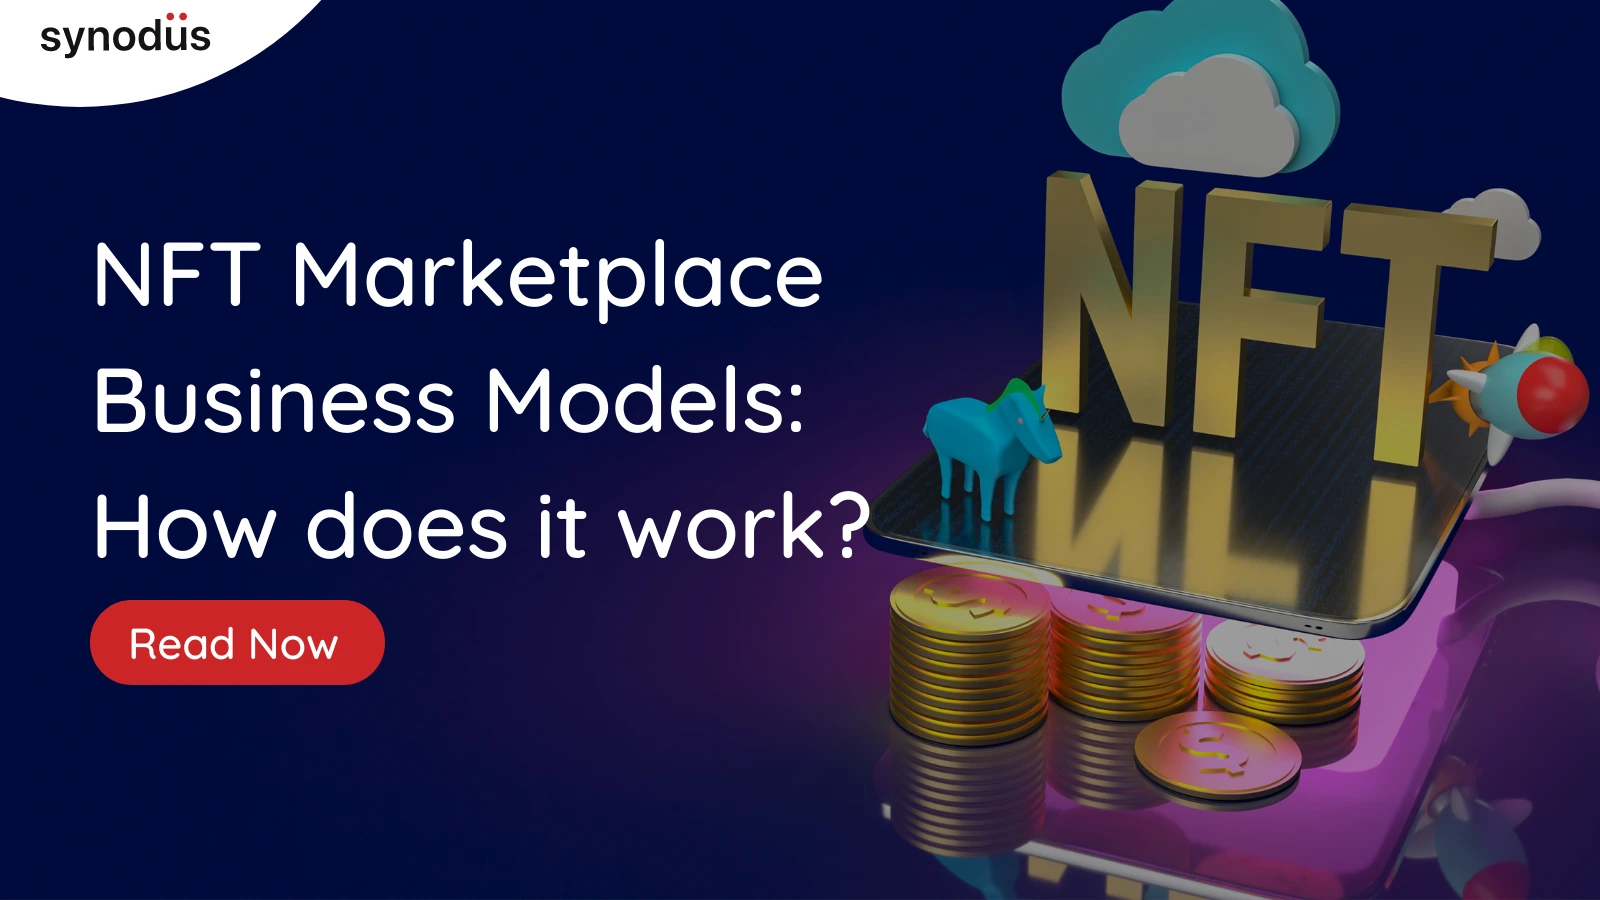 NFT Marketplace Business Model: How does it work?